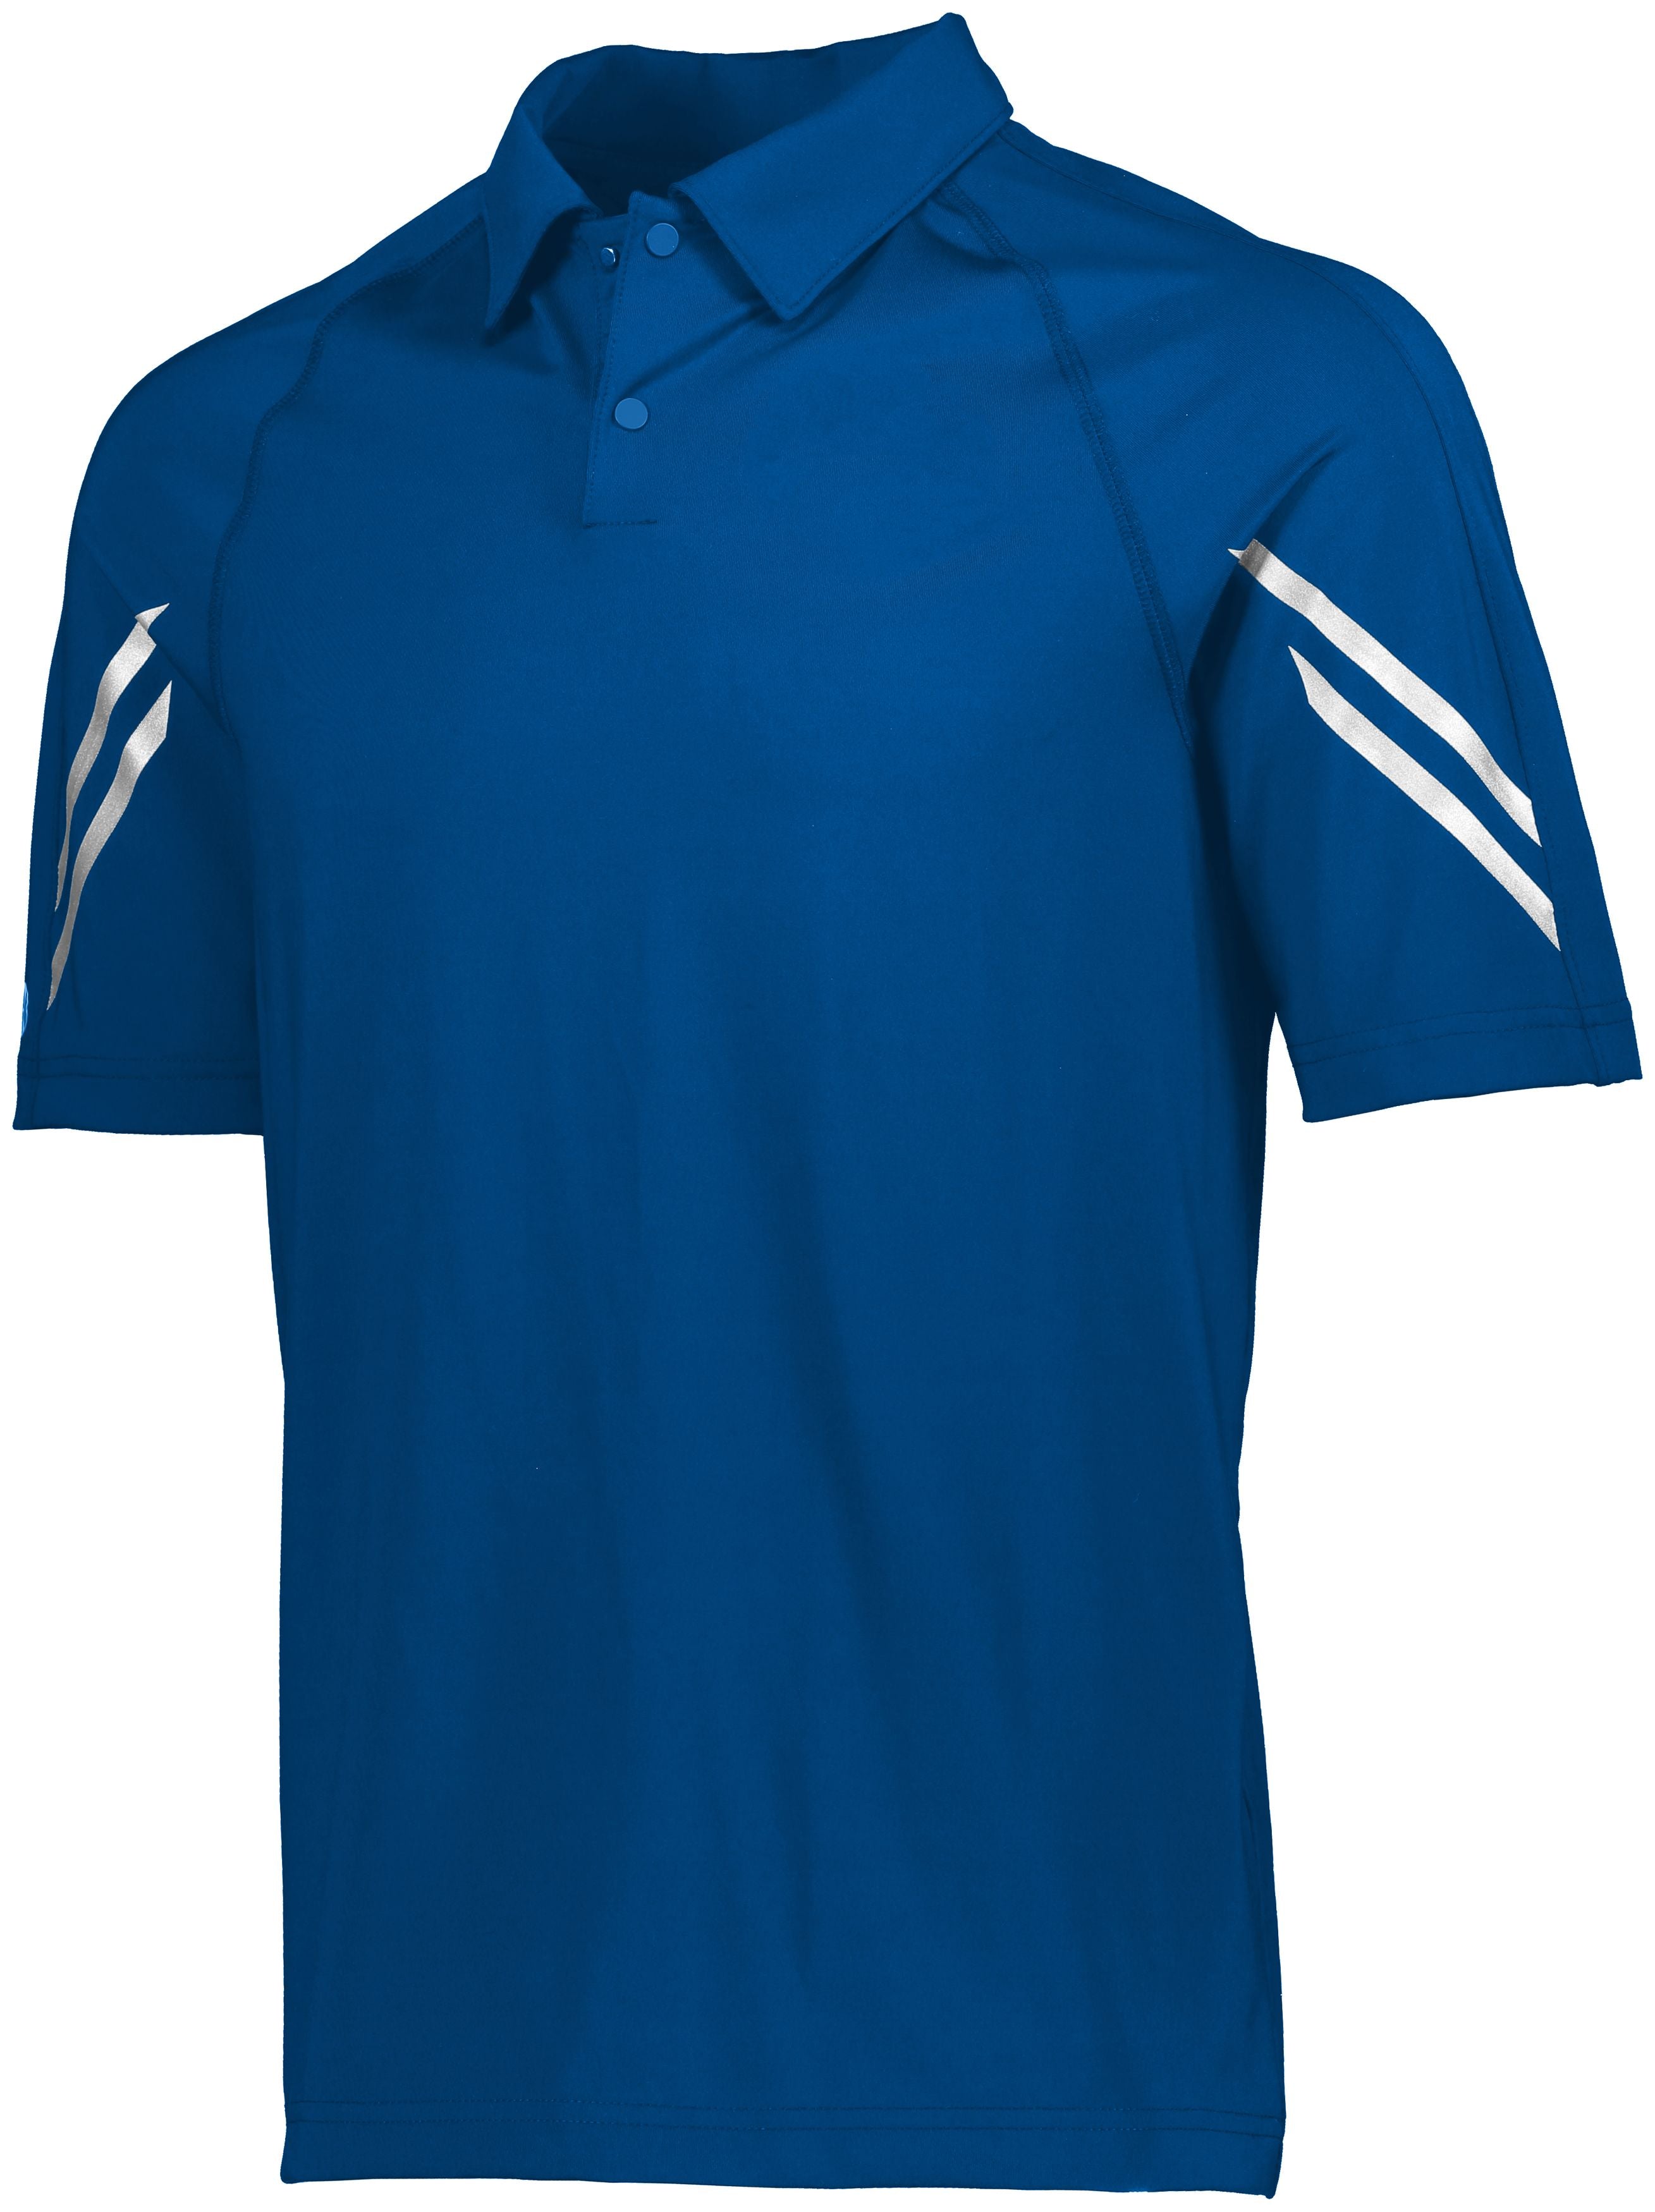 Holloway Flux Polo in Royal  -Part of the Adult, Adult-Polos, Polos, Holloway, Shirts, Flux-Collection, Corporate-Collection product lines at KanaleyCreations.com